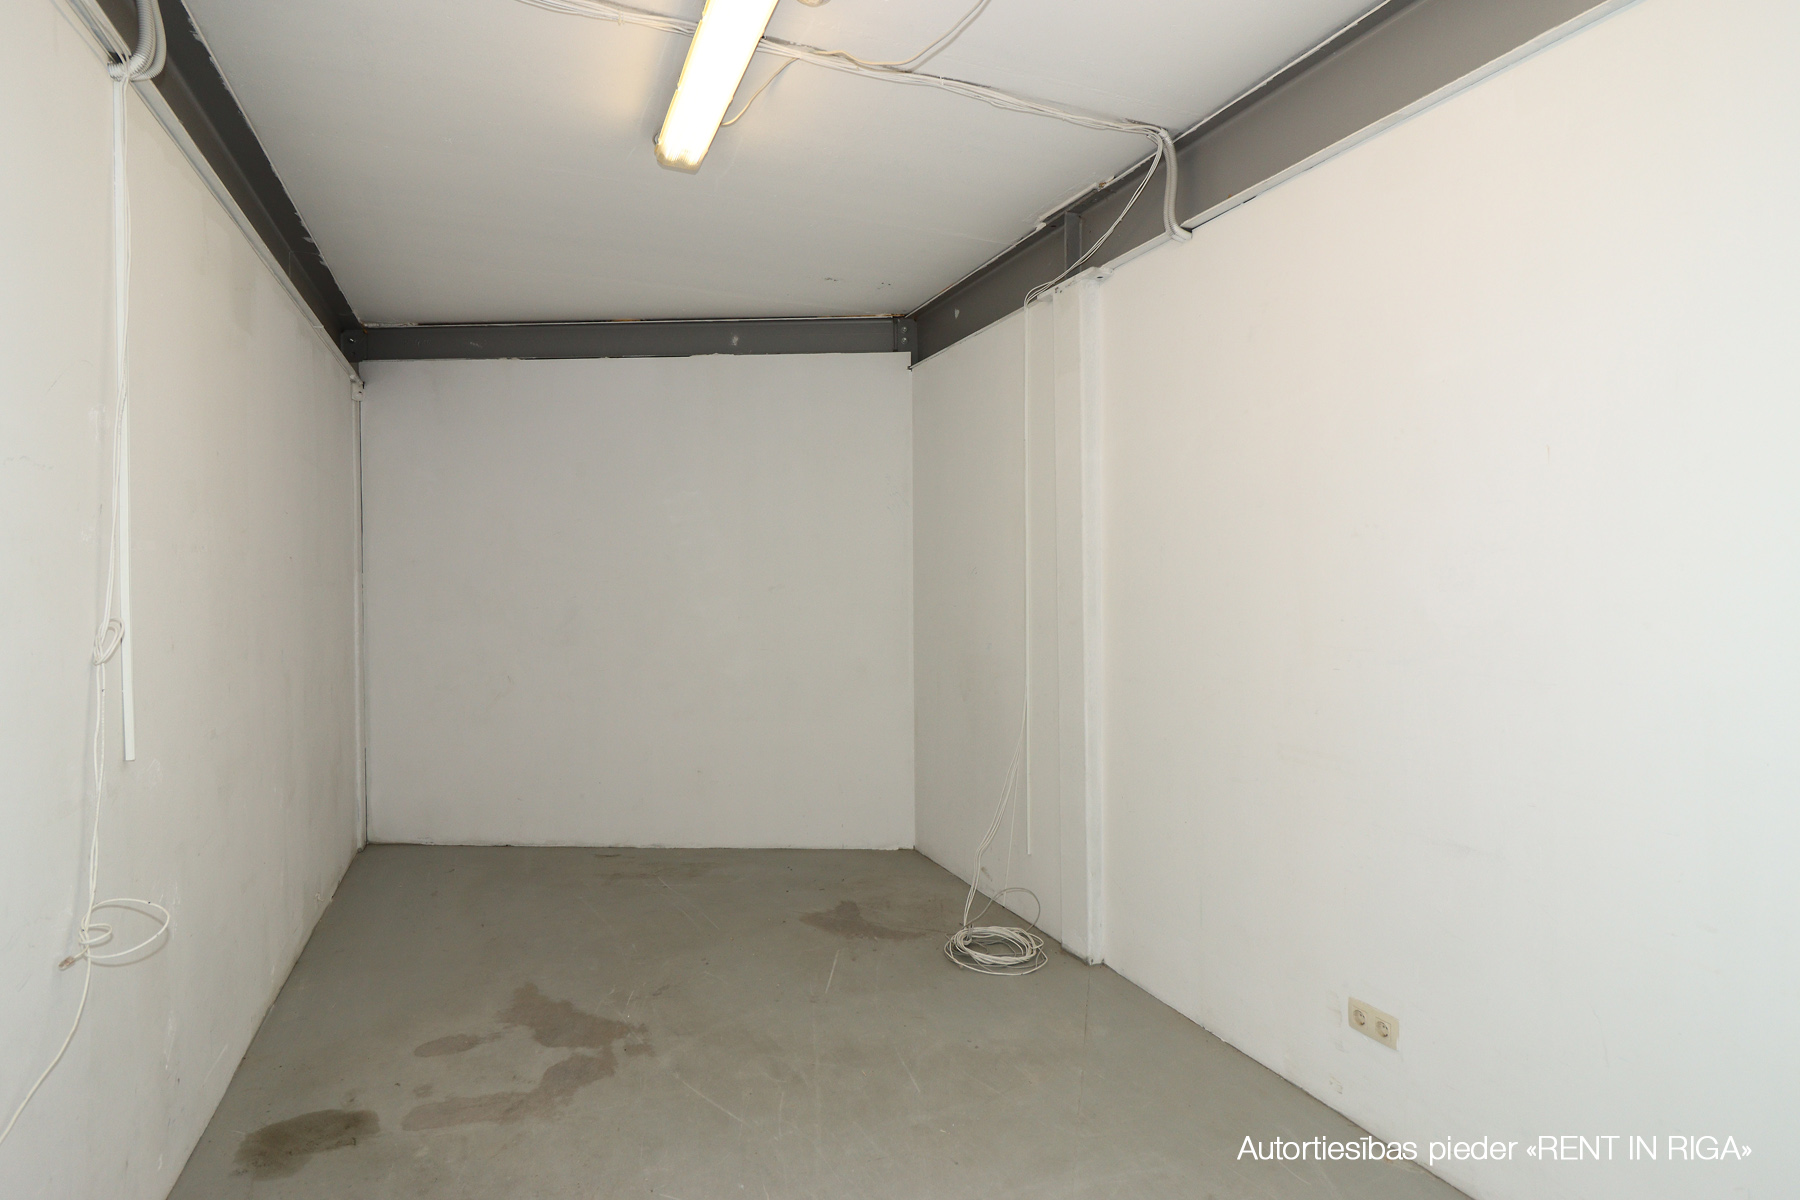 Retail premises for rent, Straupes street - Image 1